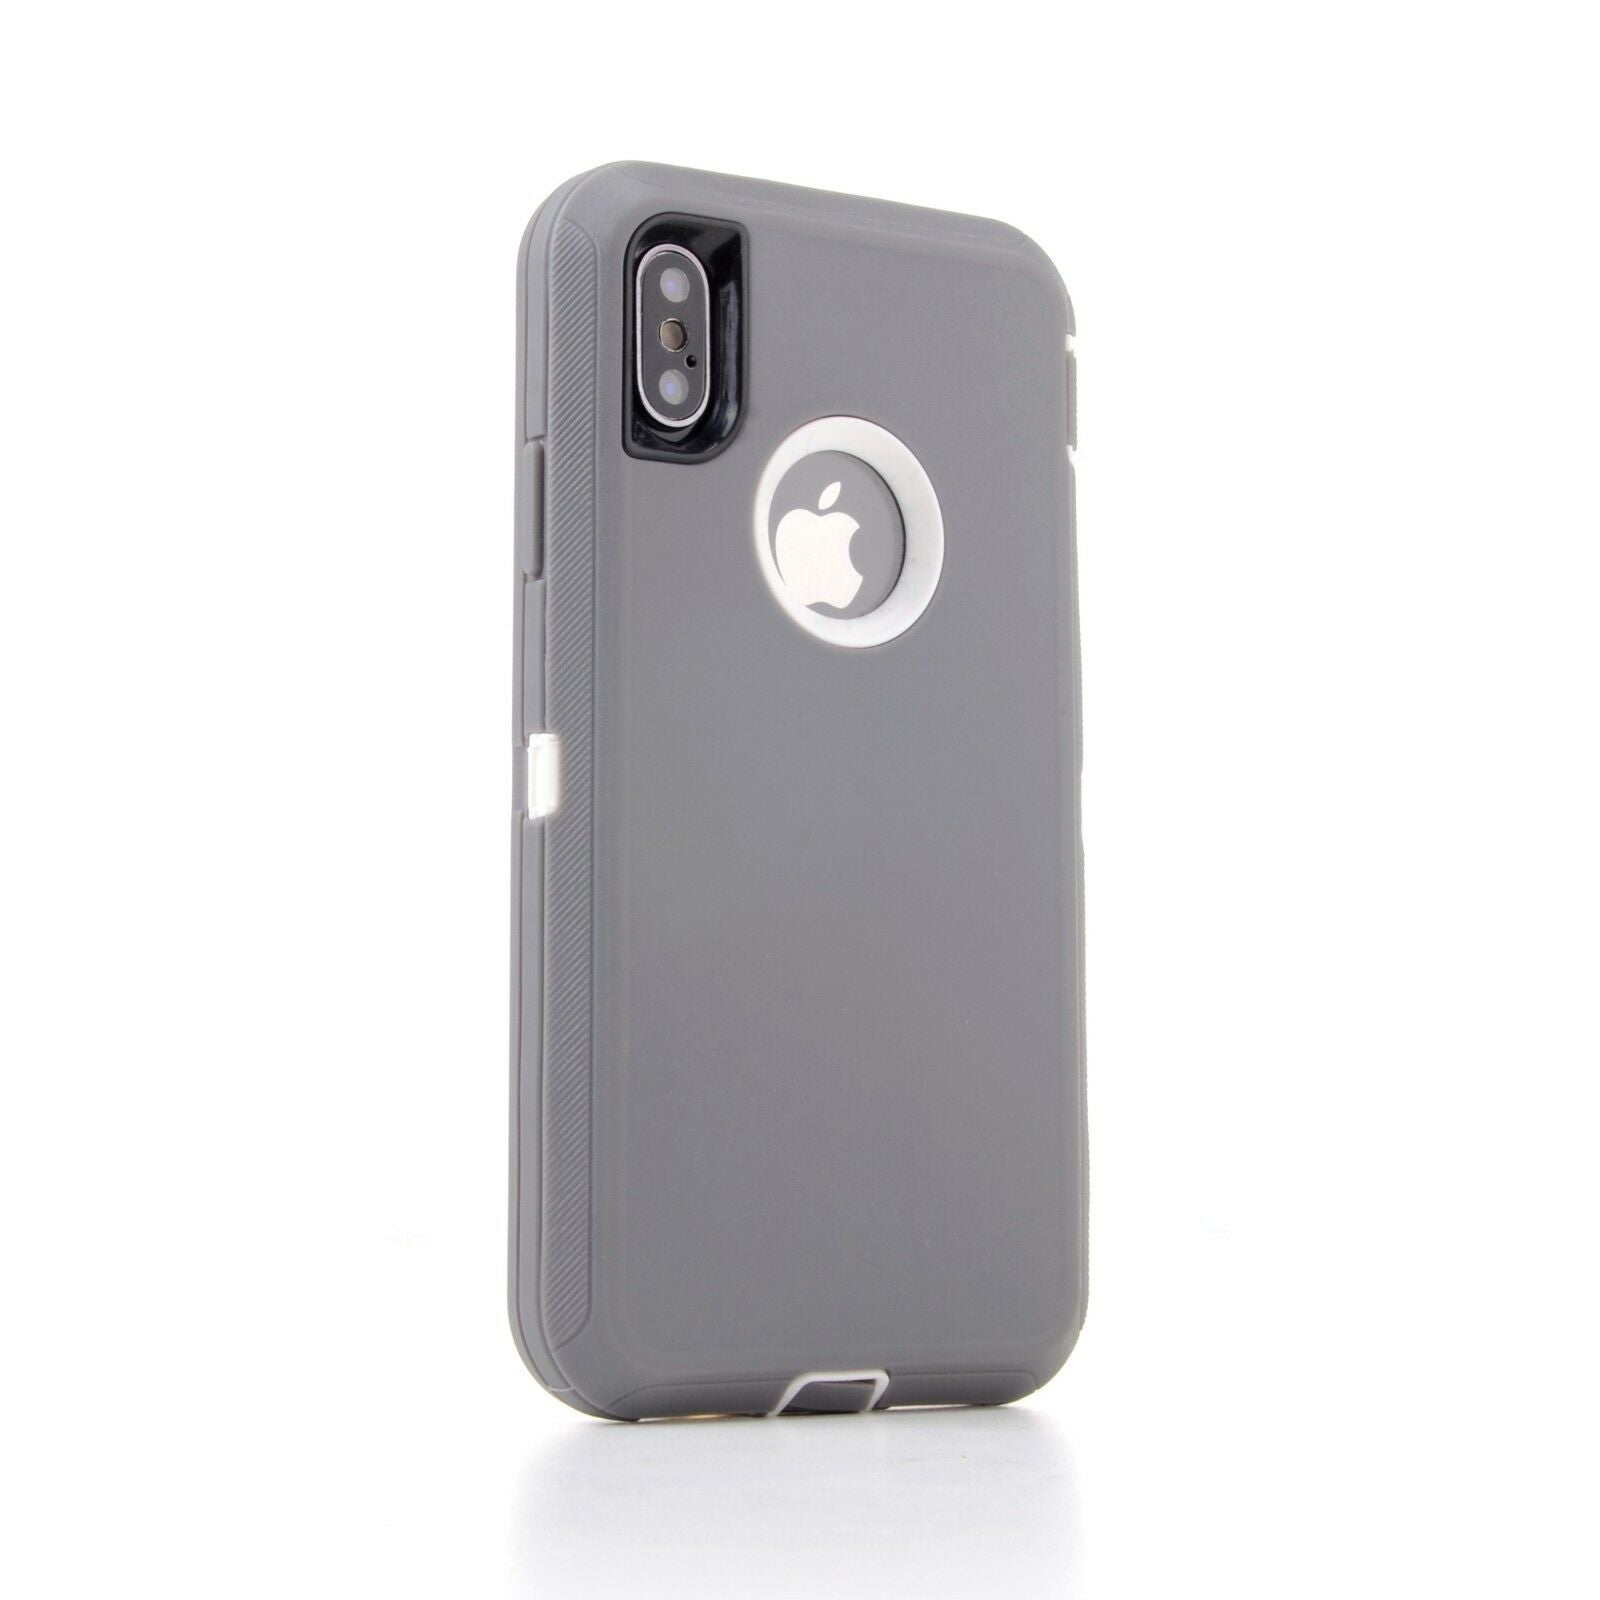 Case Hybrid Heavy Duty Shockproof Rubber For iPhone Se 6 Plus